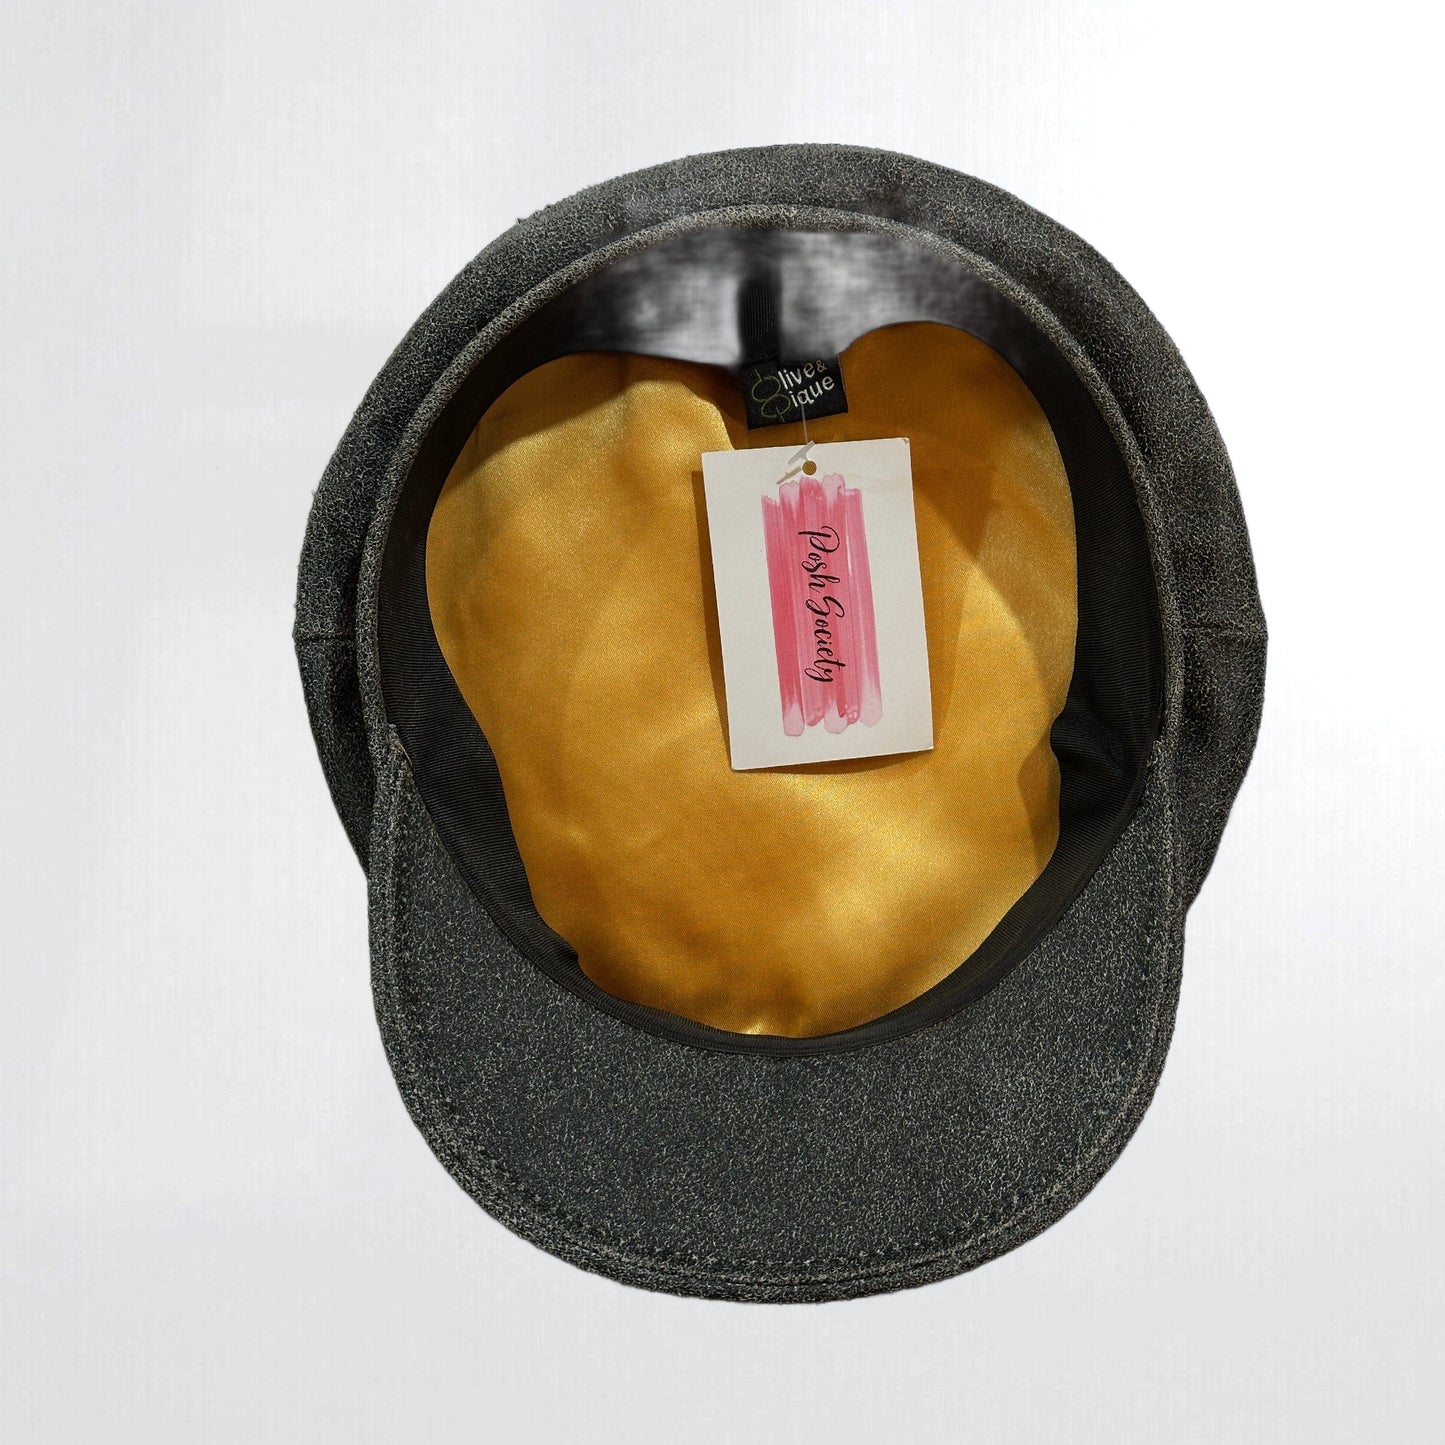 Aged Genuine Suede Leather Fisherman's Cap Posh Society Boutique Hats Visit poshsocietyhb